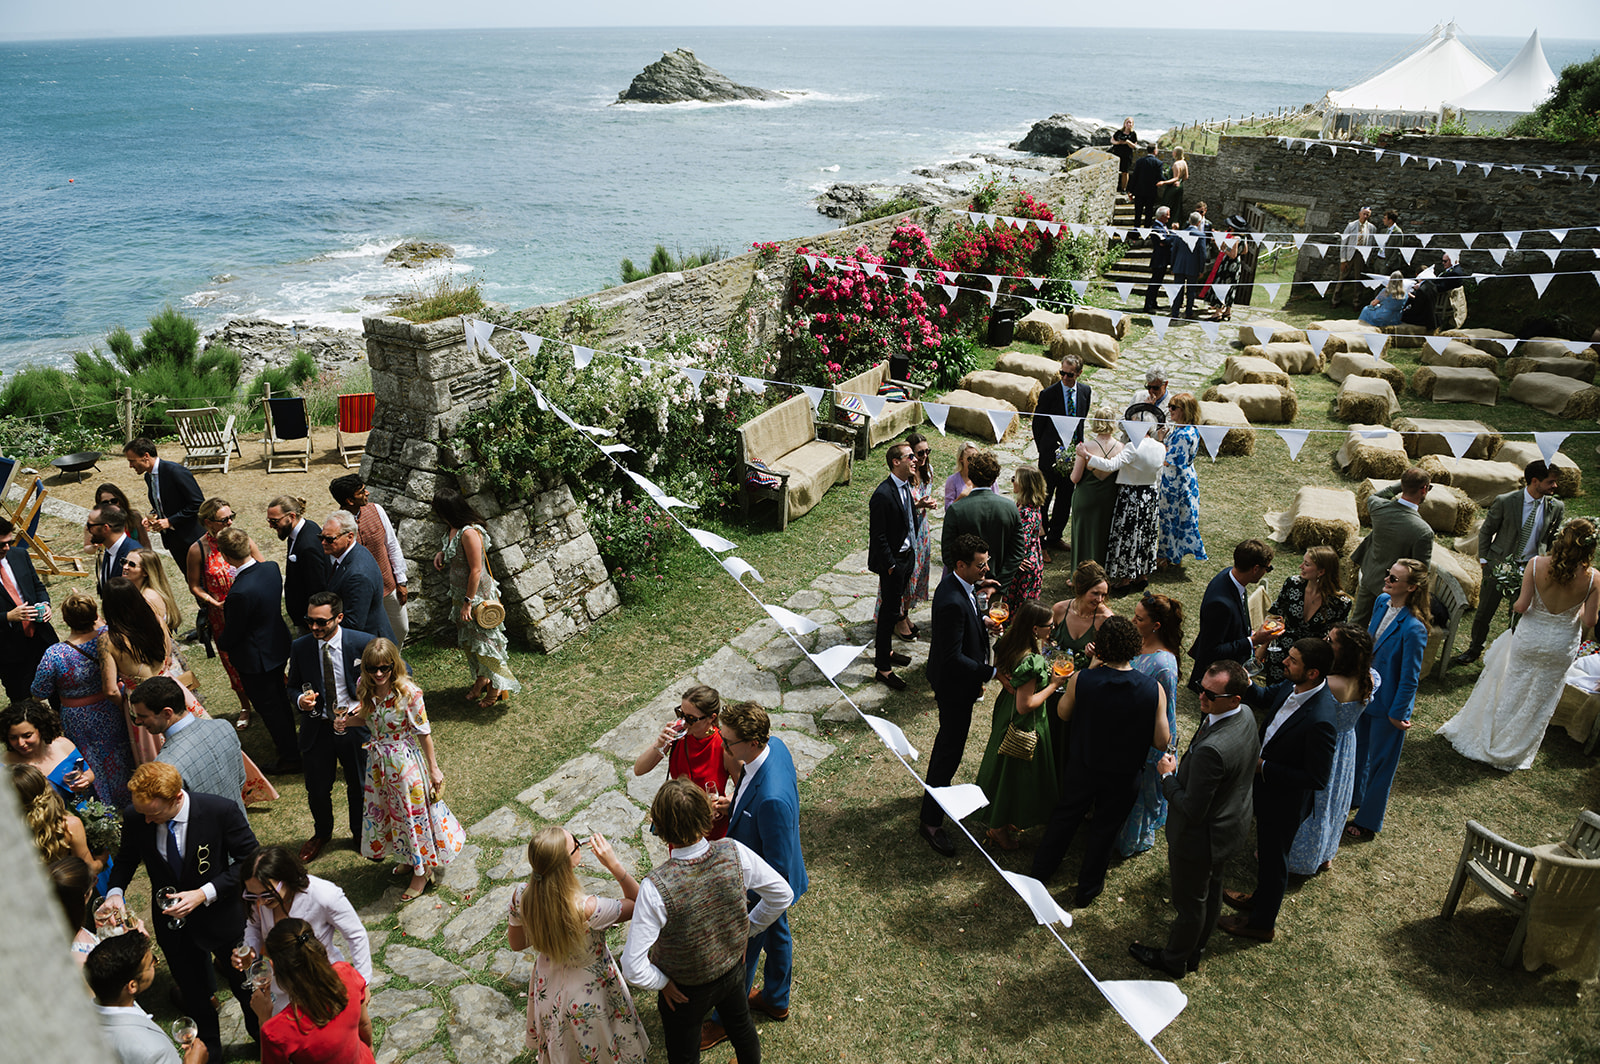 Wedding guests mingling in the garden at Porth-en-Alls with the blue sea and sky in the background